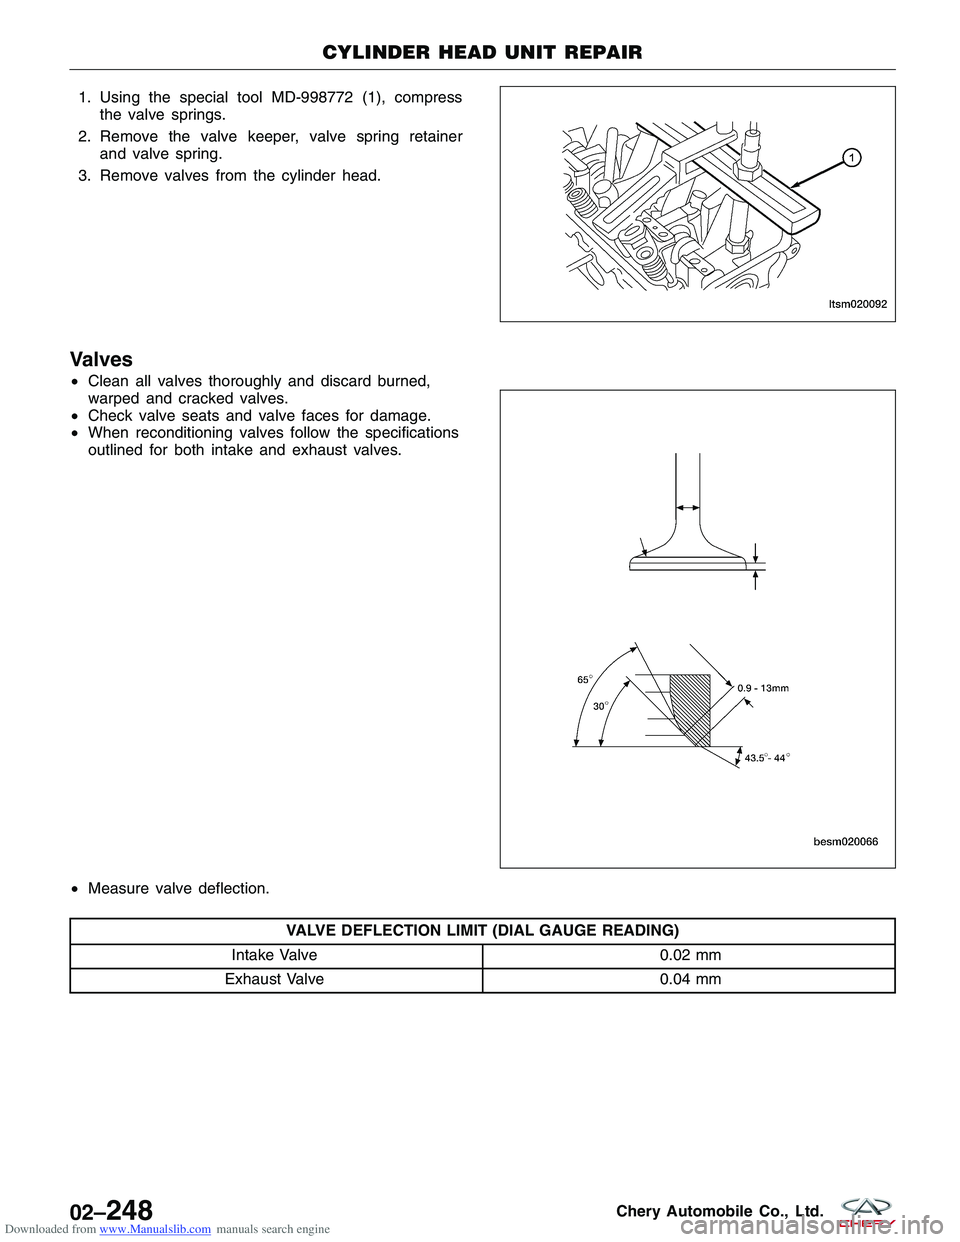 CHERY TIGGO 2009  Service Repair Manual Downloaded from www.Manualslib.com manuals search engine 1. Using the special tool MD-998772 (1), compressthe valve springs.
2. Remove the valve keeper, valve spring retainer and valve spring.
3. Remo